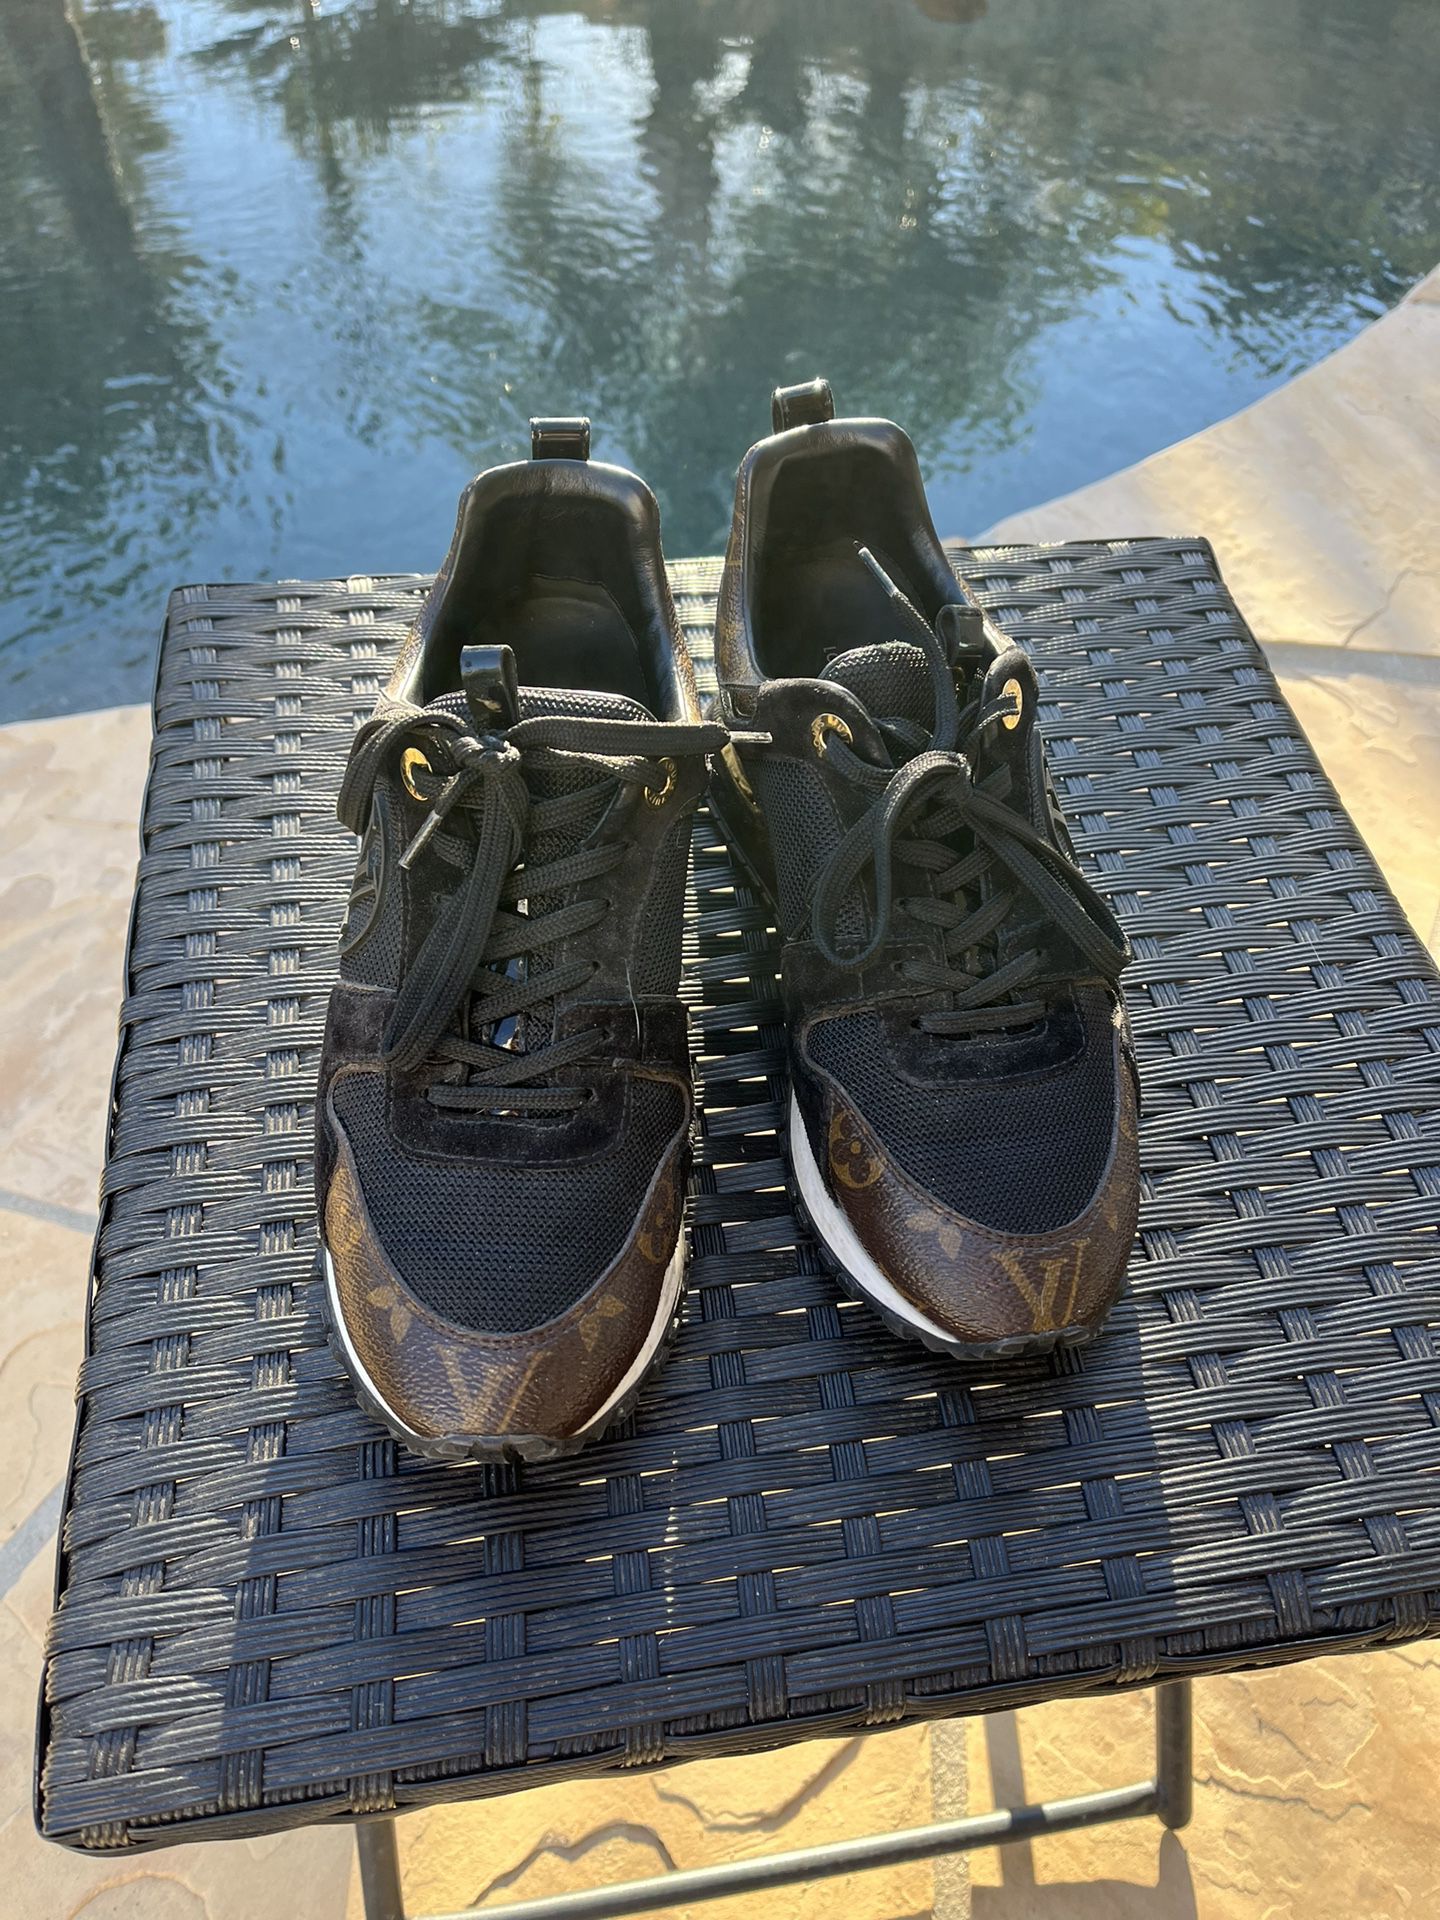 Louis Vuitton Run Away Sneakers SIZE 10.5 for Sale in The Bronx, NY -  OfferUp